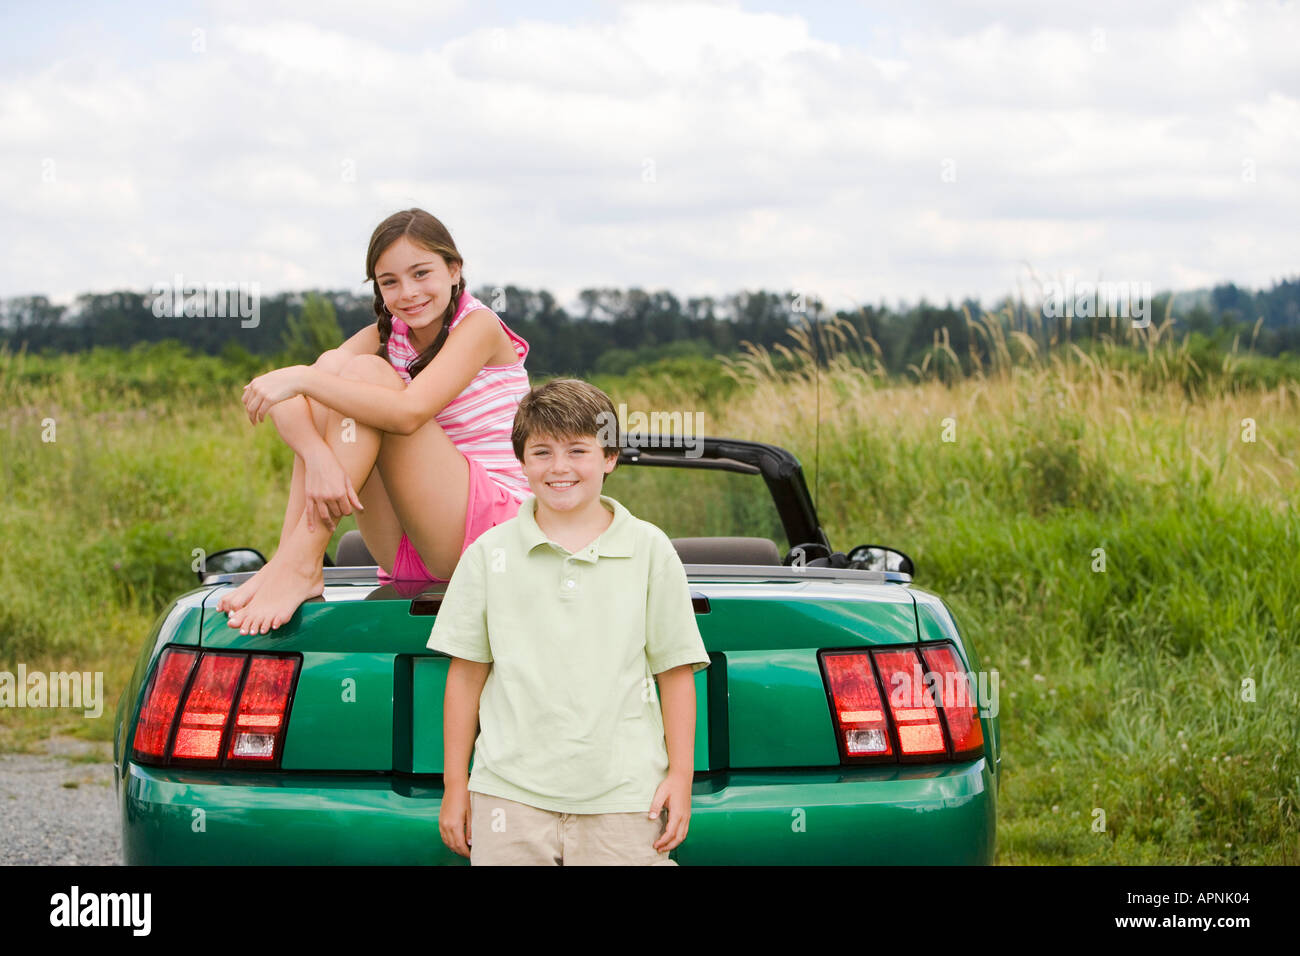 Portrait of a brother and sister outdoors Stock Photo